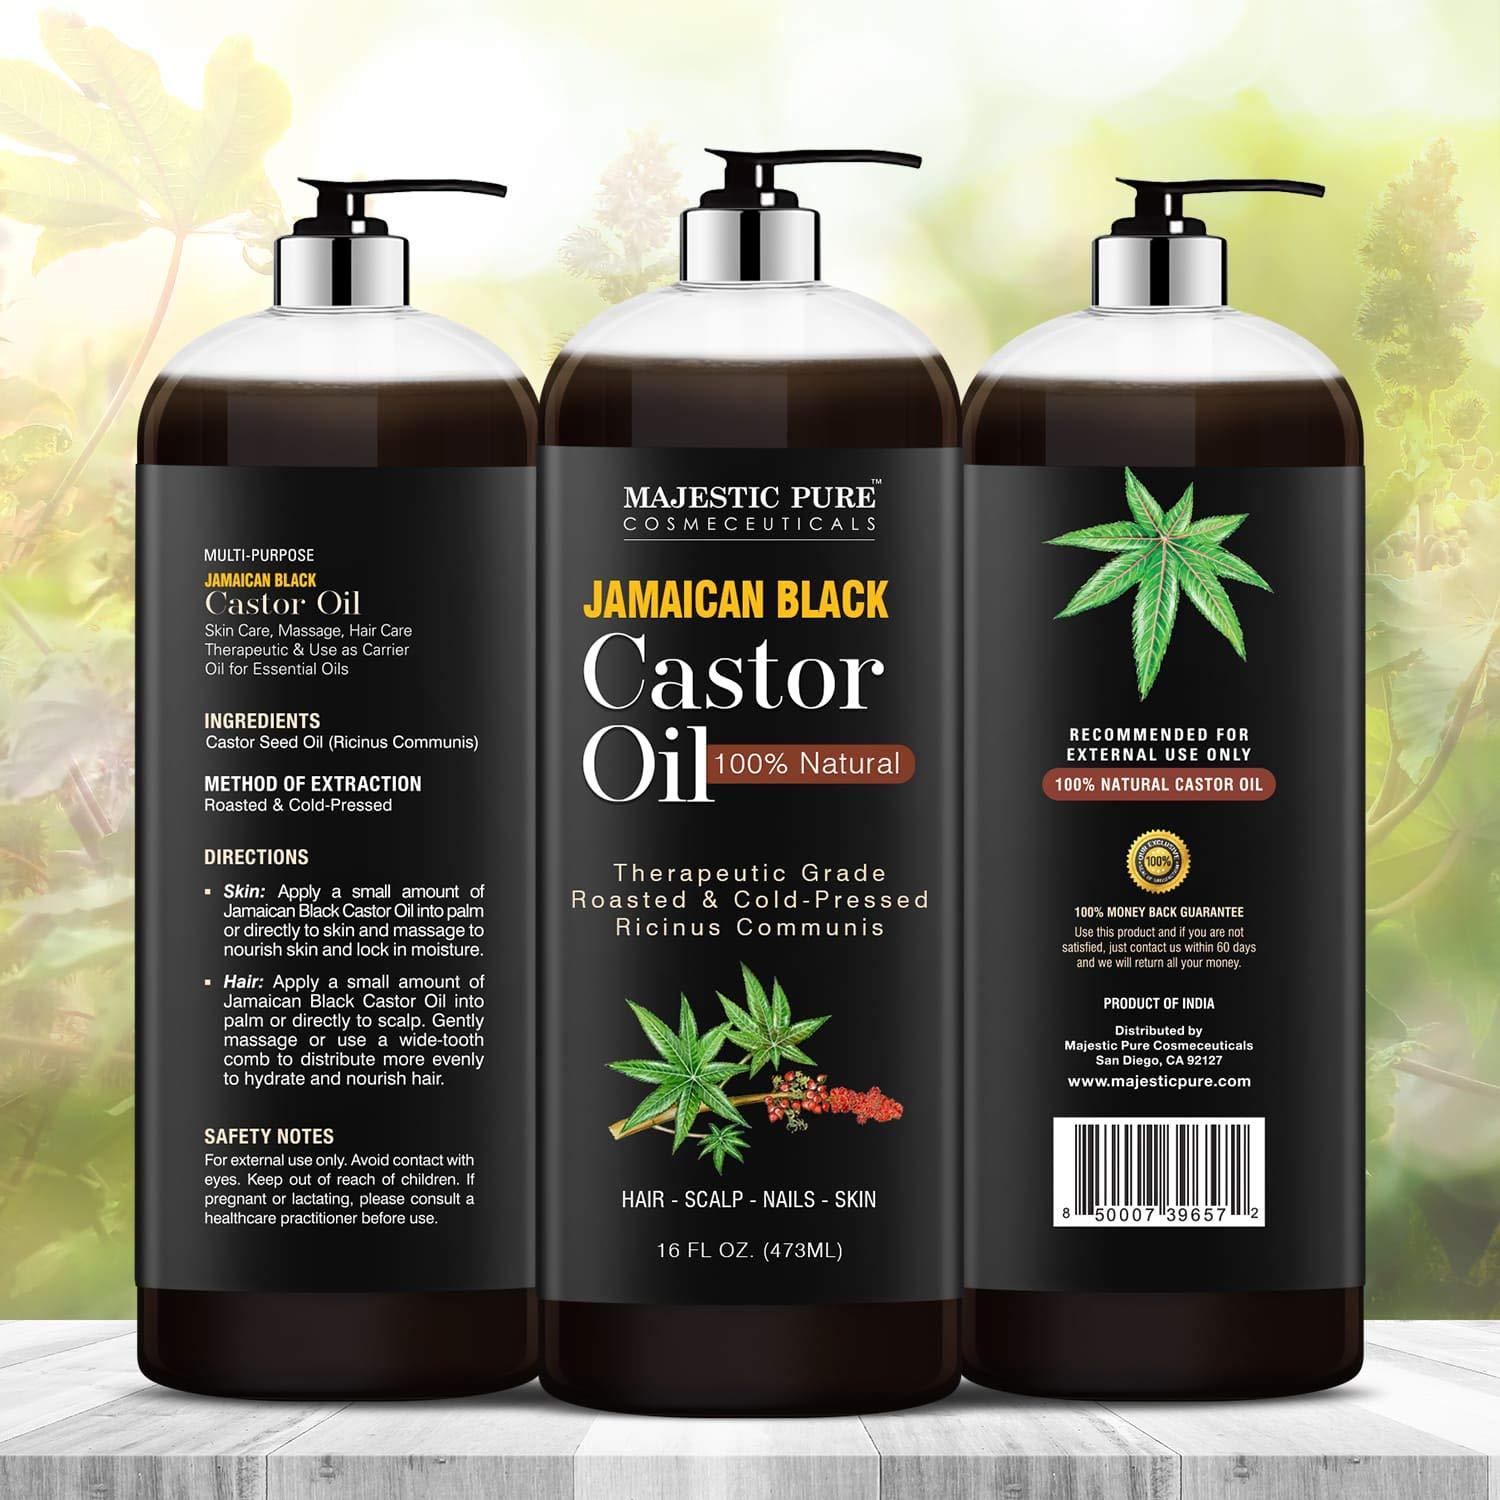 Majestic Pure Jamaican Black Castor Oil for Hair Growth & Natural Skin Care  - Roasted & Cold-Pressed - Massage, Scalp, Hair and Nails - 16 fl oz